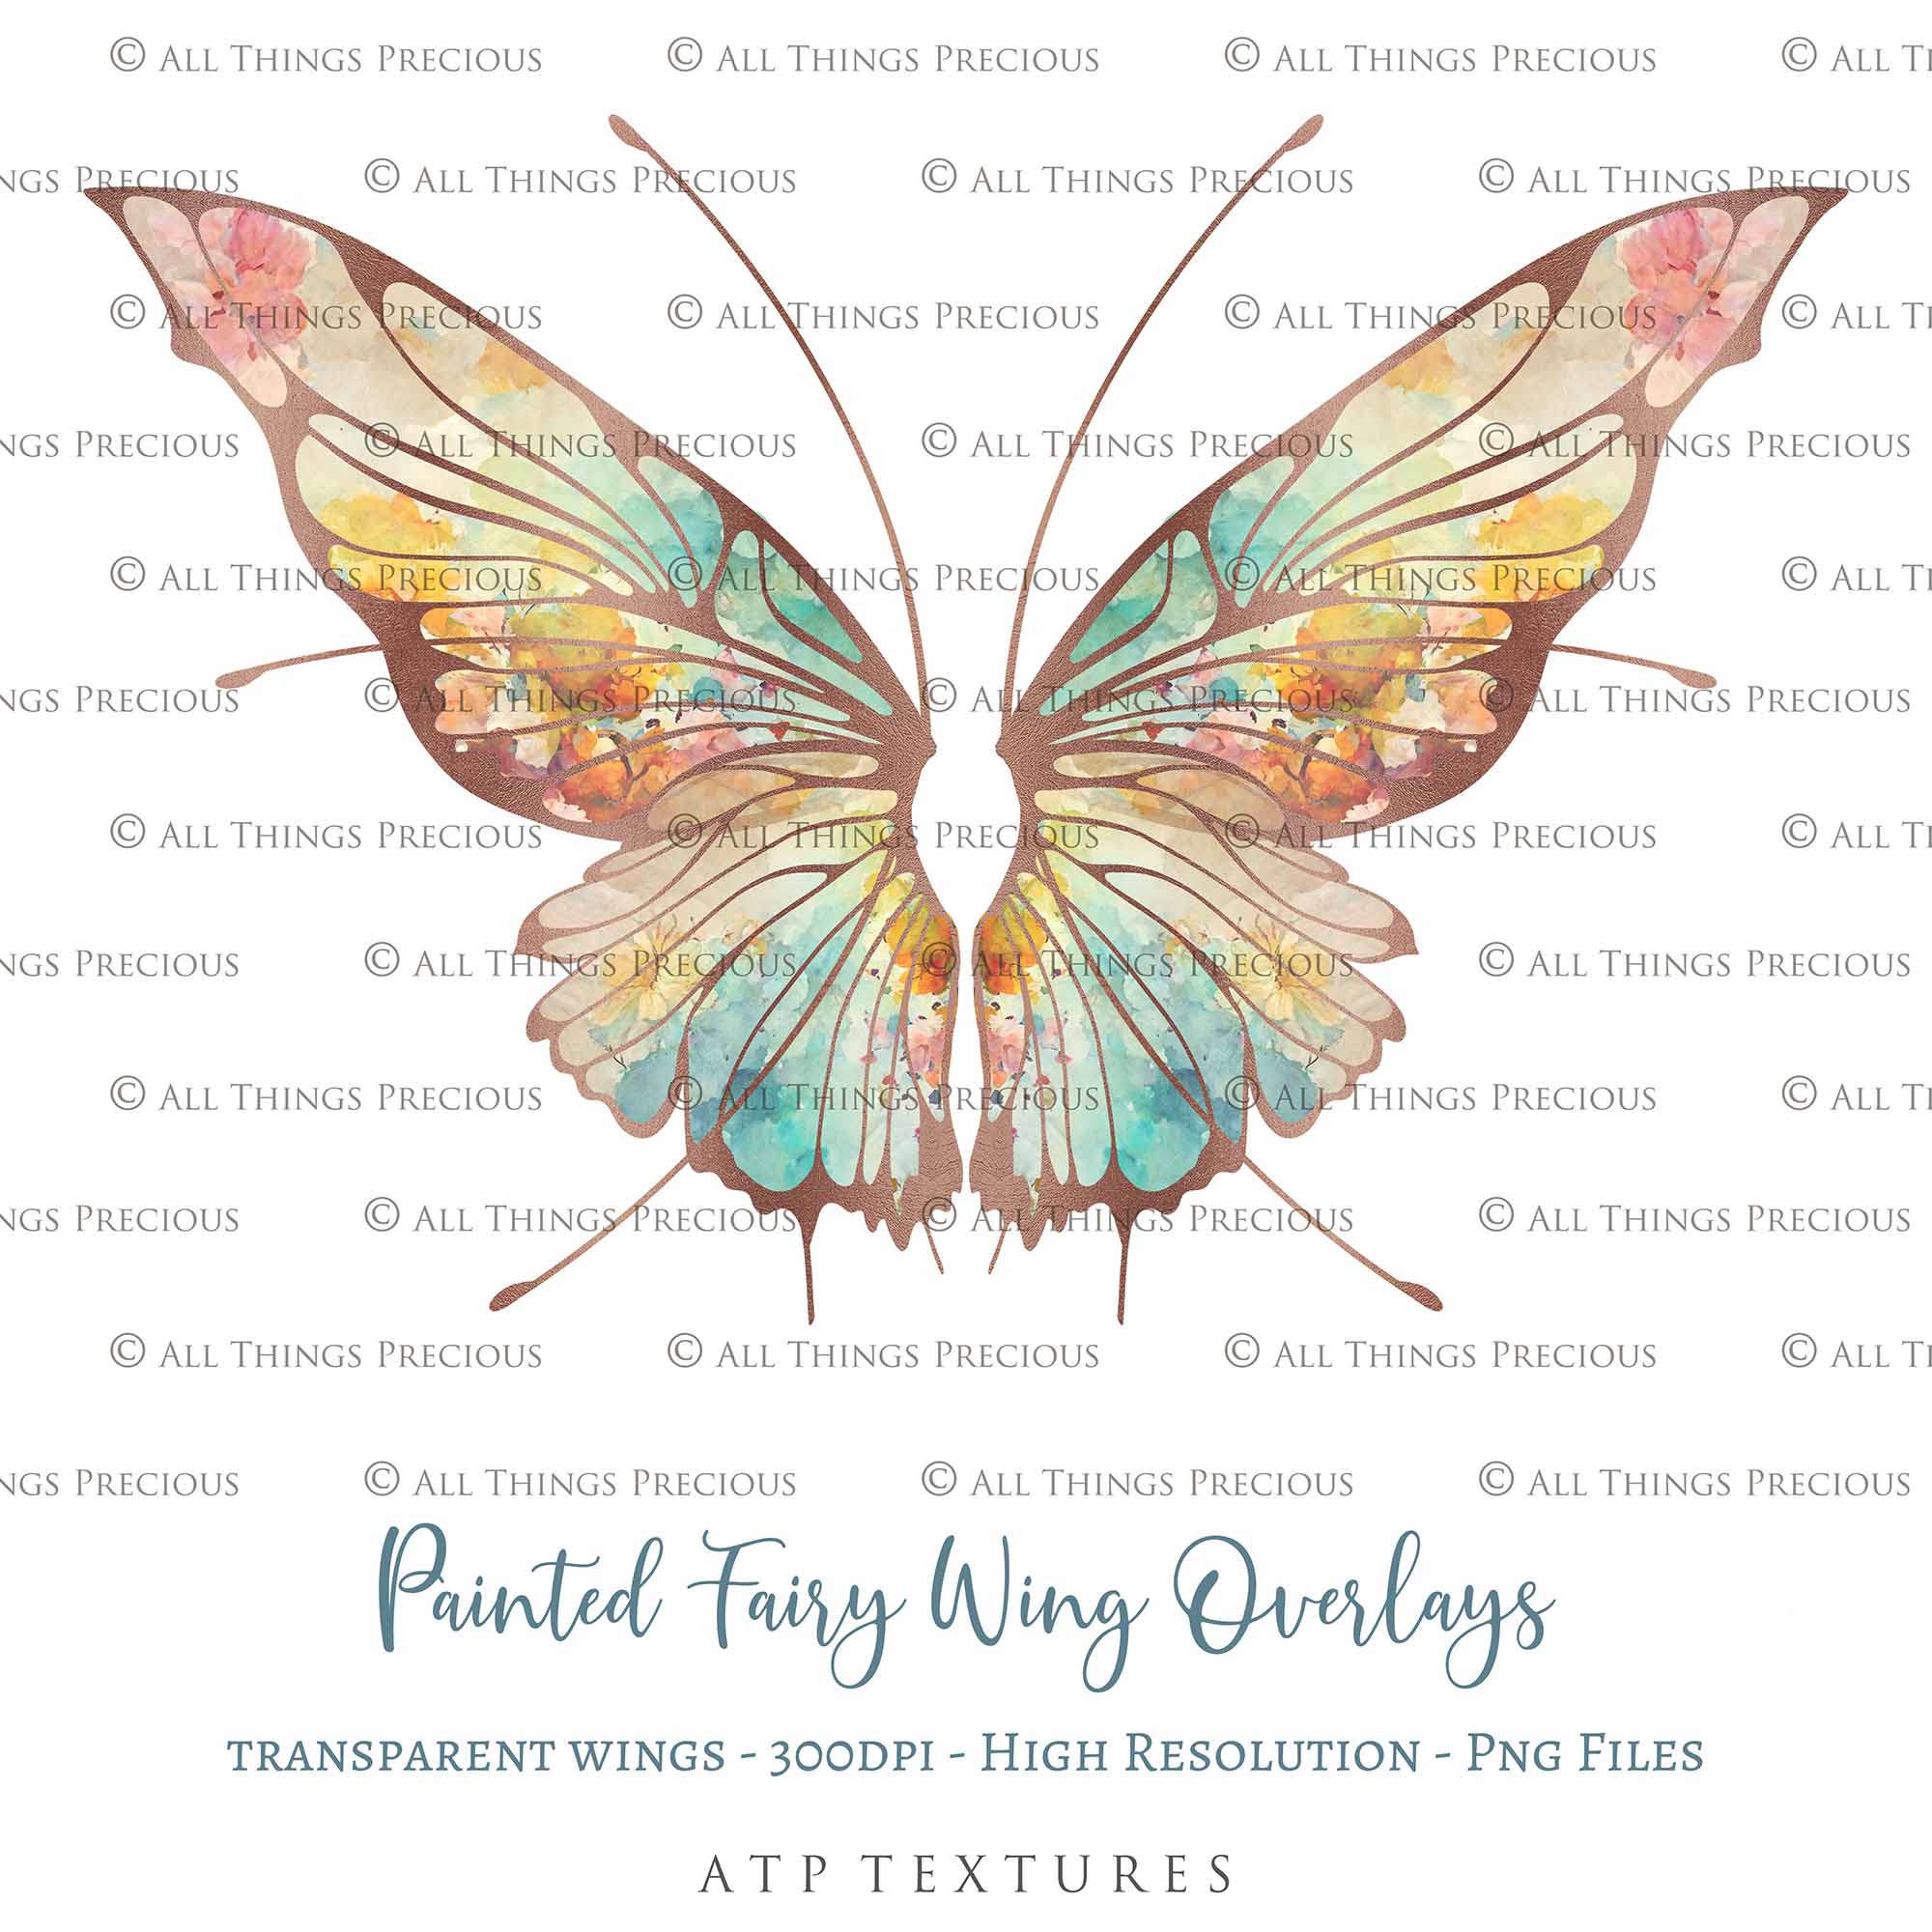 Digital Faery Wing Overlays! Fairy wings, Png overlays for photoshop. Photography editing. High resolution, 300dpi fairy wings. Overlays for photography. Digital stock and resources. Graphic design. Fairy Photos. Colourful Fairy wings. Faerie Wings.